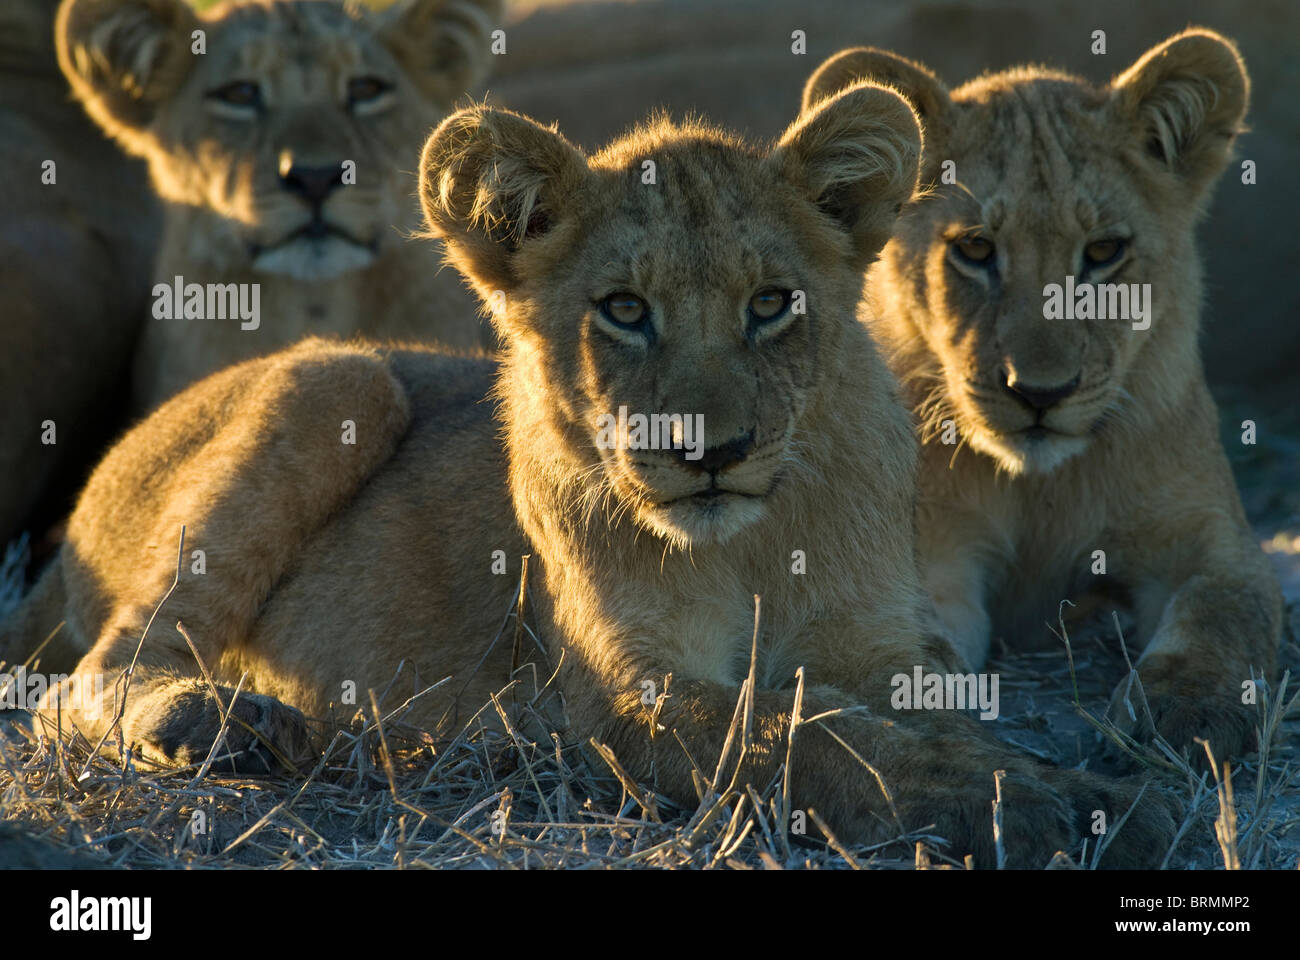 A close up of three lion cubs resting Stock Photo